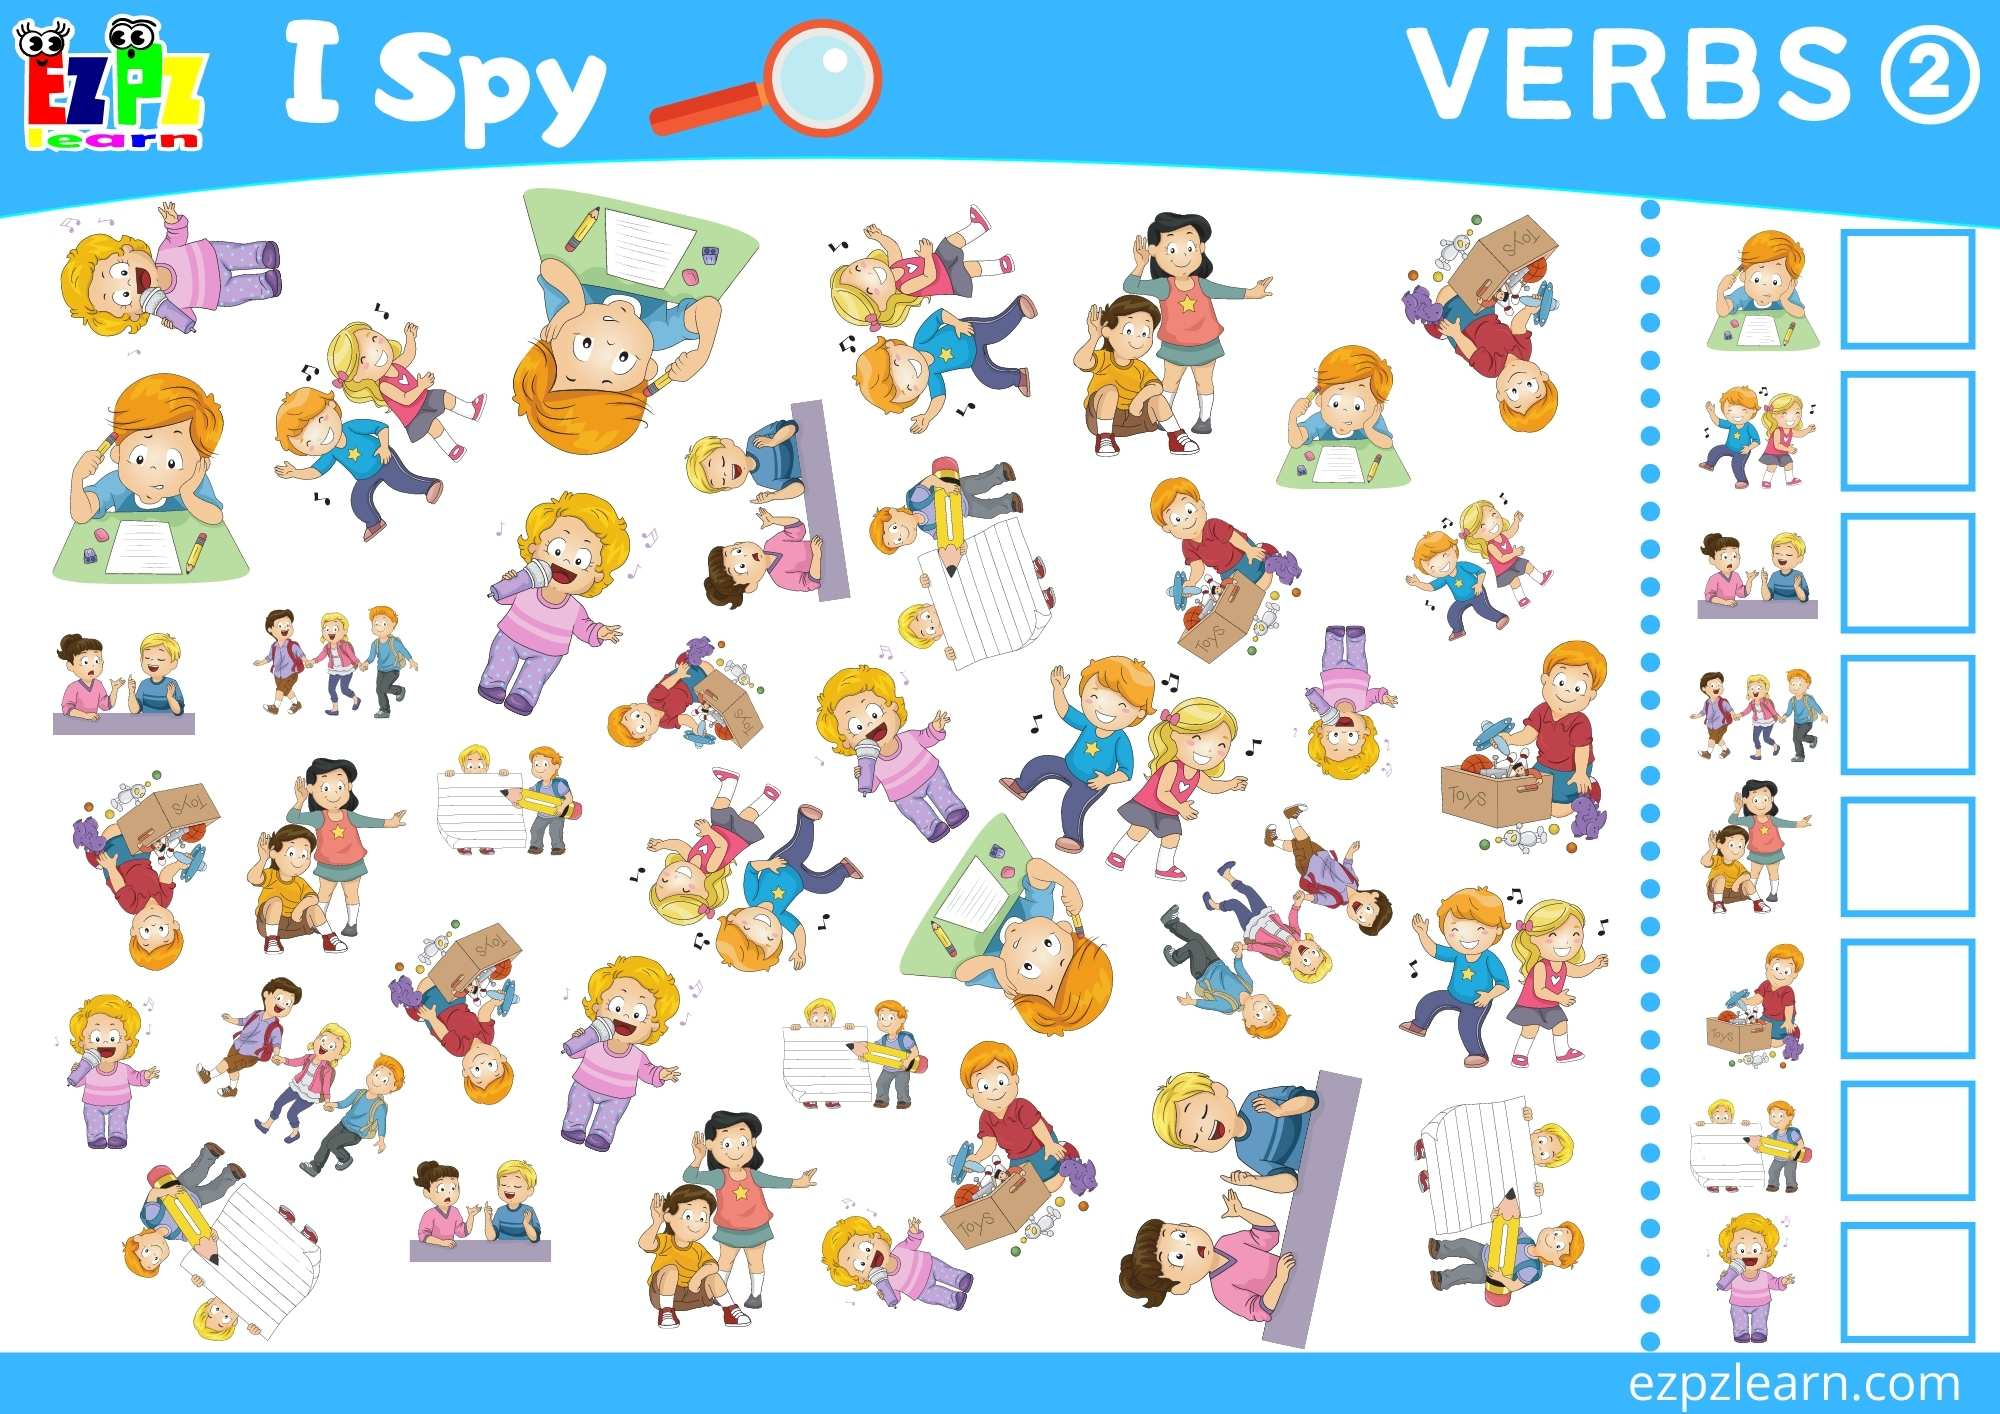 Action Verbs 2 Topic I Spy Game For Kids Free Pdf Download - Free Printable Verb Games